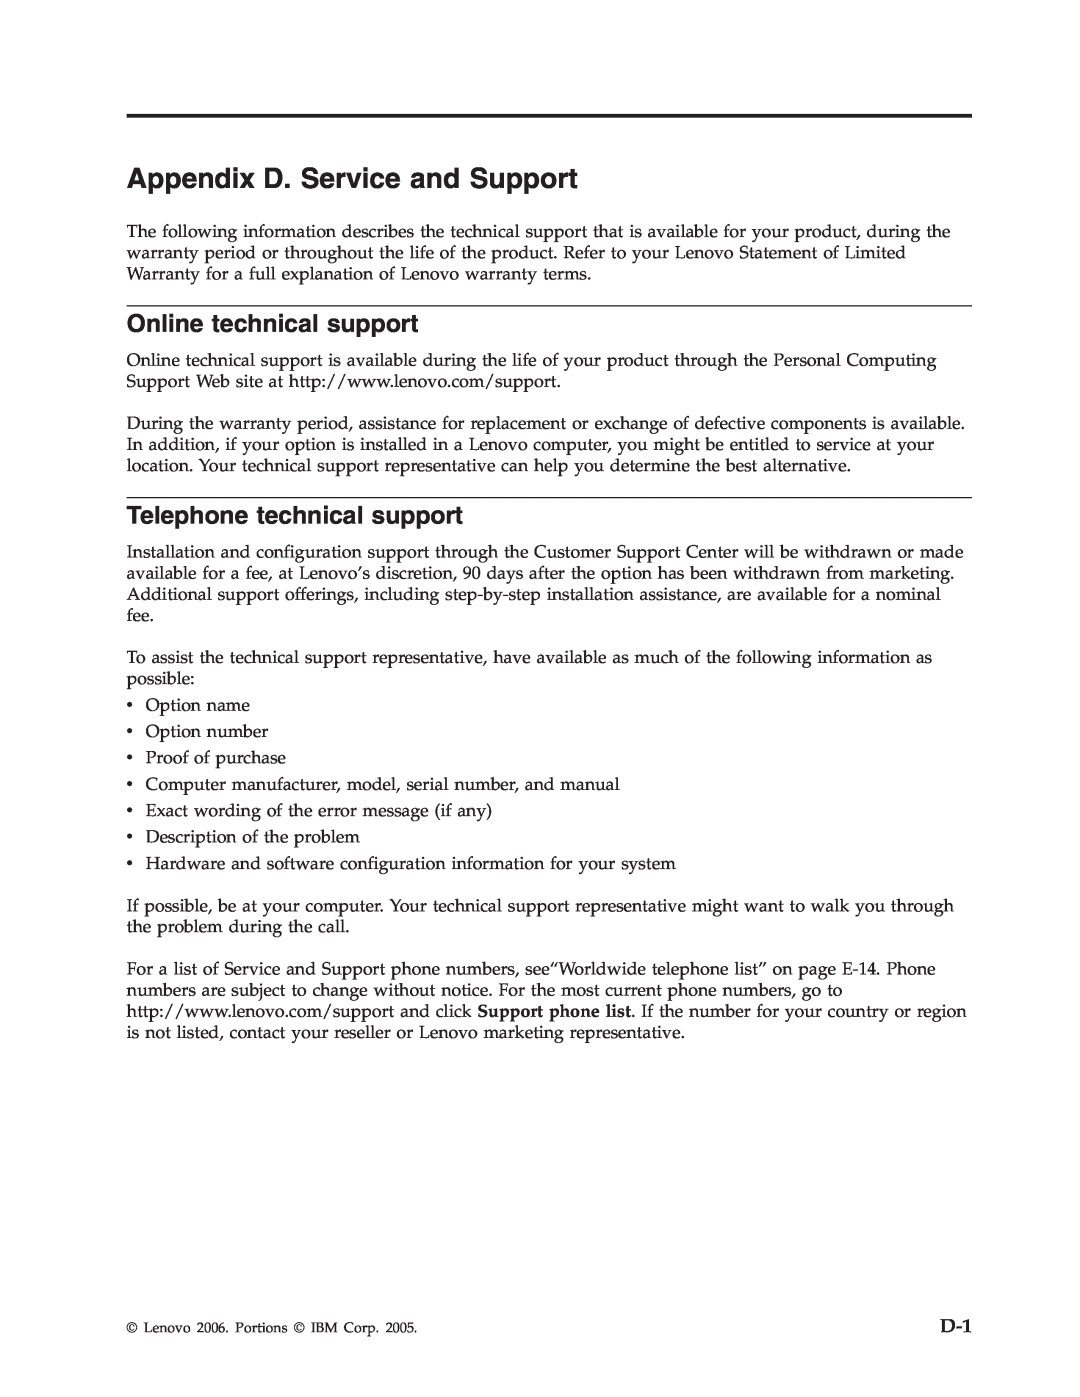 Lenovo 41N5583 manual Appendix D. Service and Support, Online technical support, Telephone technical support 